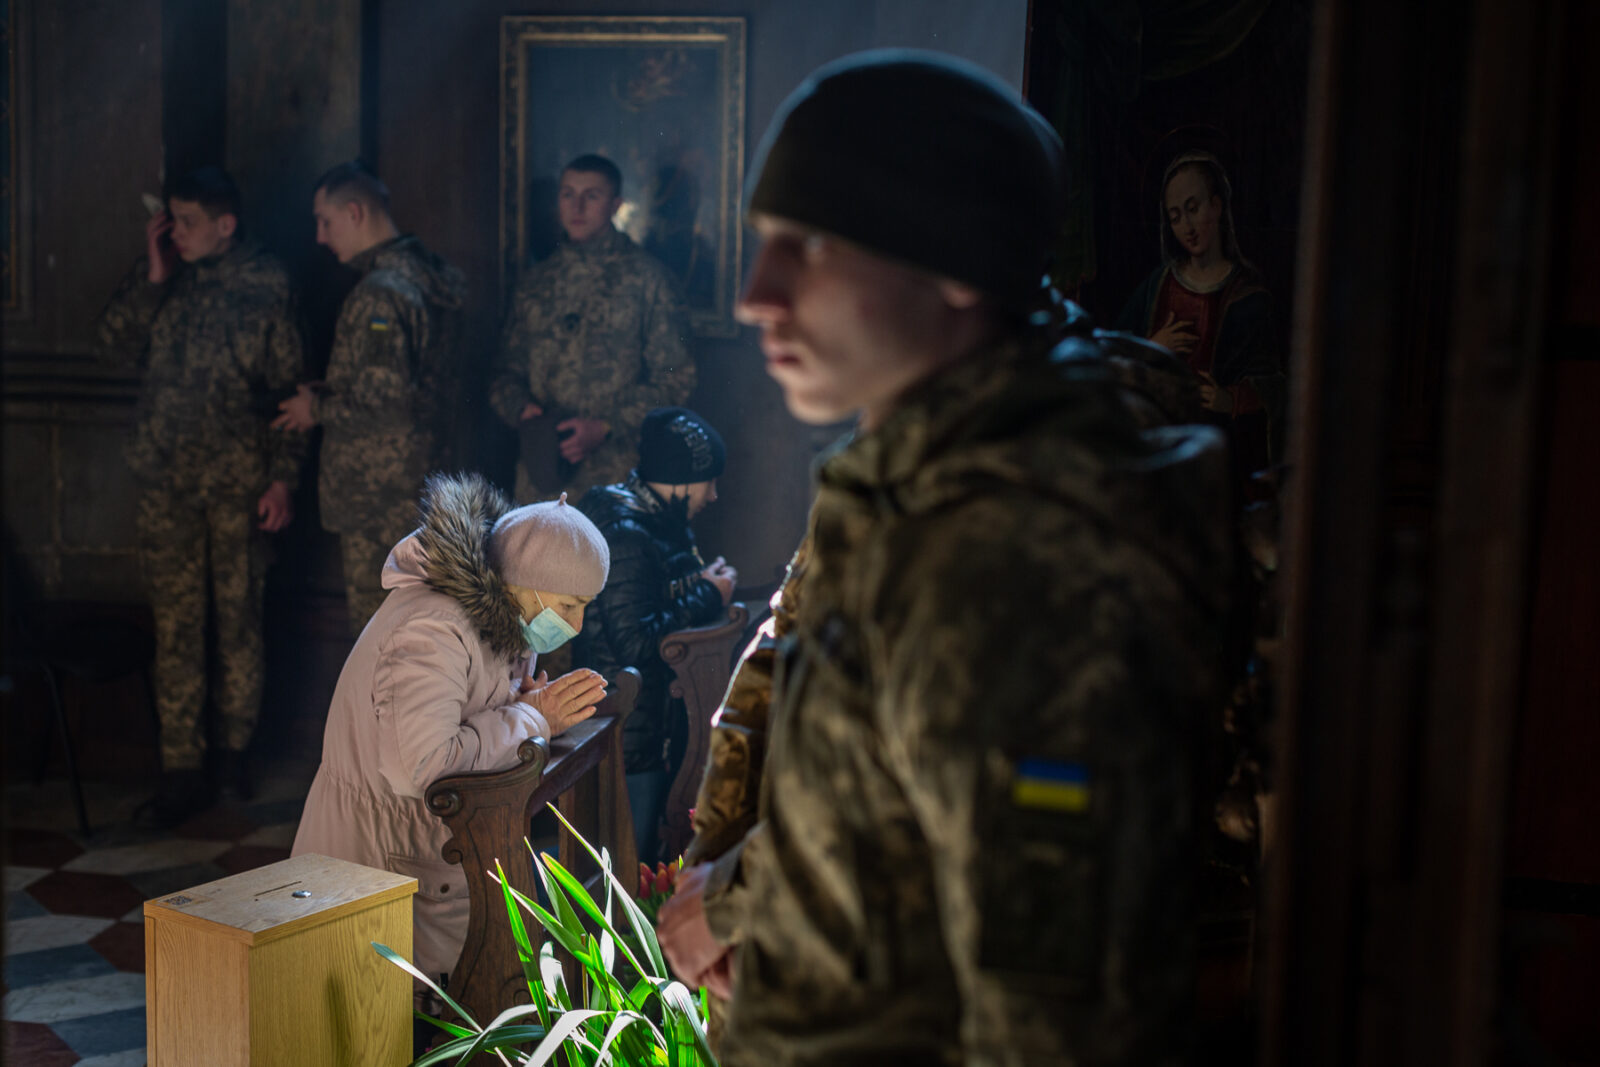 A funeral was held for three of those killed at the International Peacekeeping and Security Center in Yavoriv outside of Lviv near the border with Poland Sunday morning. It was held at the Church of the Most Holy Apostles Peter and Paul in Lviv, Ukraine. Women praying at the alter of the Virgin Mary during the funeral.